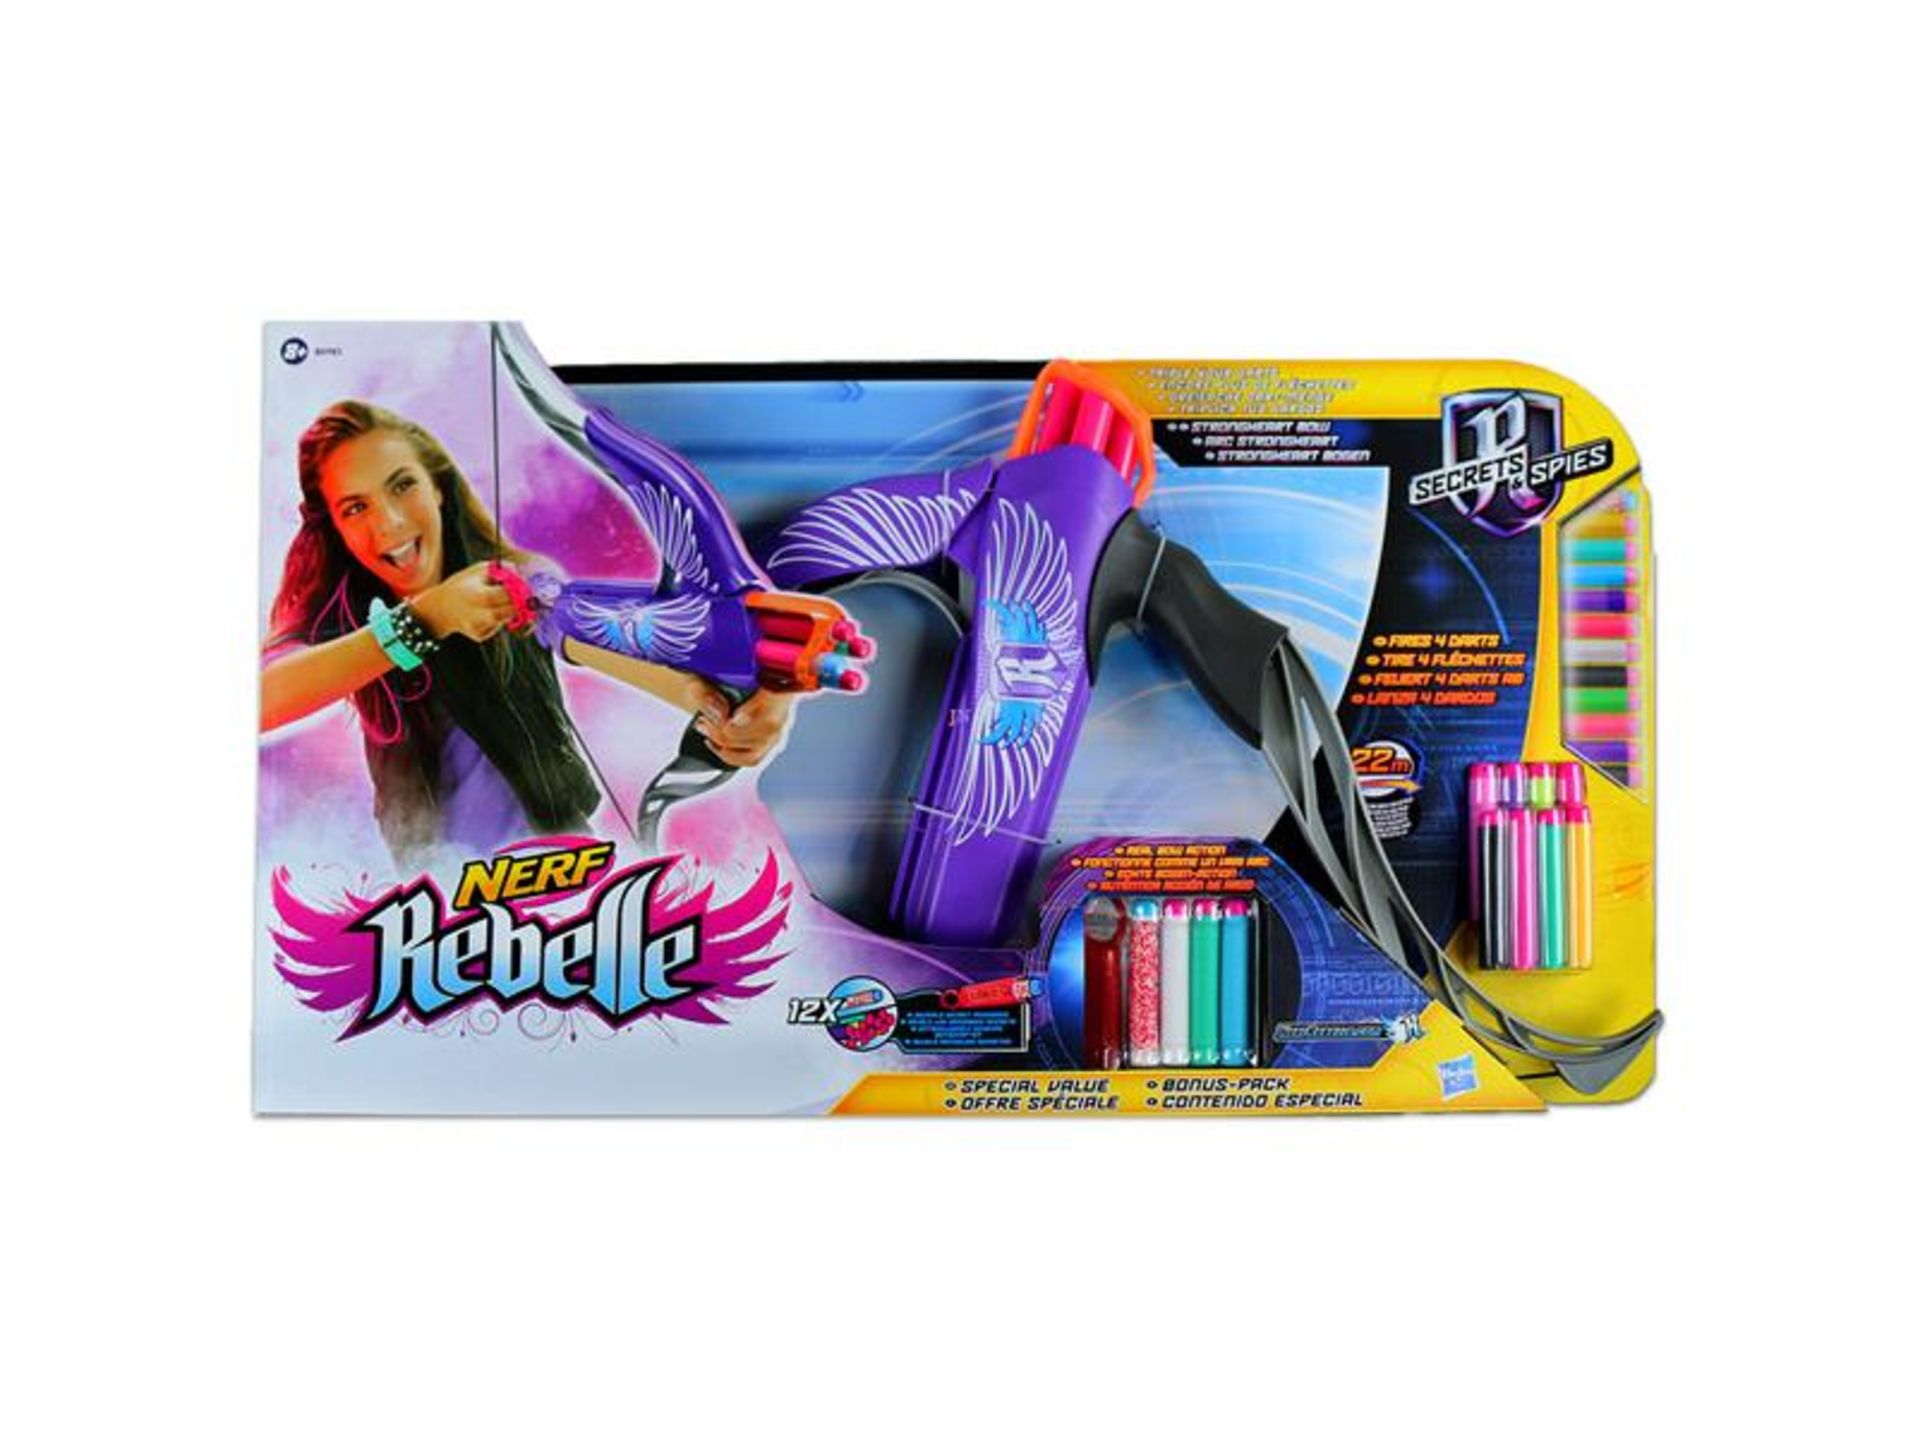 V Brand New Hasbro Nerf Rebelle Secrets And Spies Strongheart Bow With Bonus Pack (8 Extra Darts) - Image 2 of 2